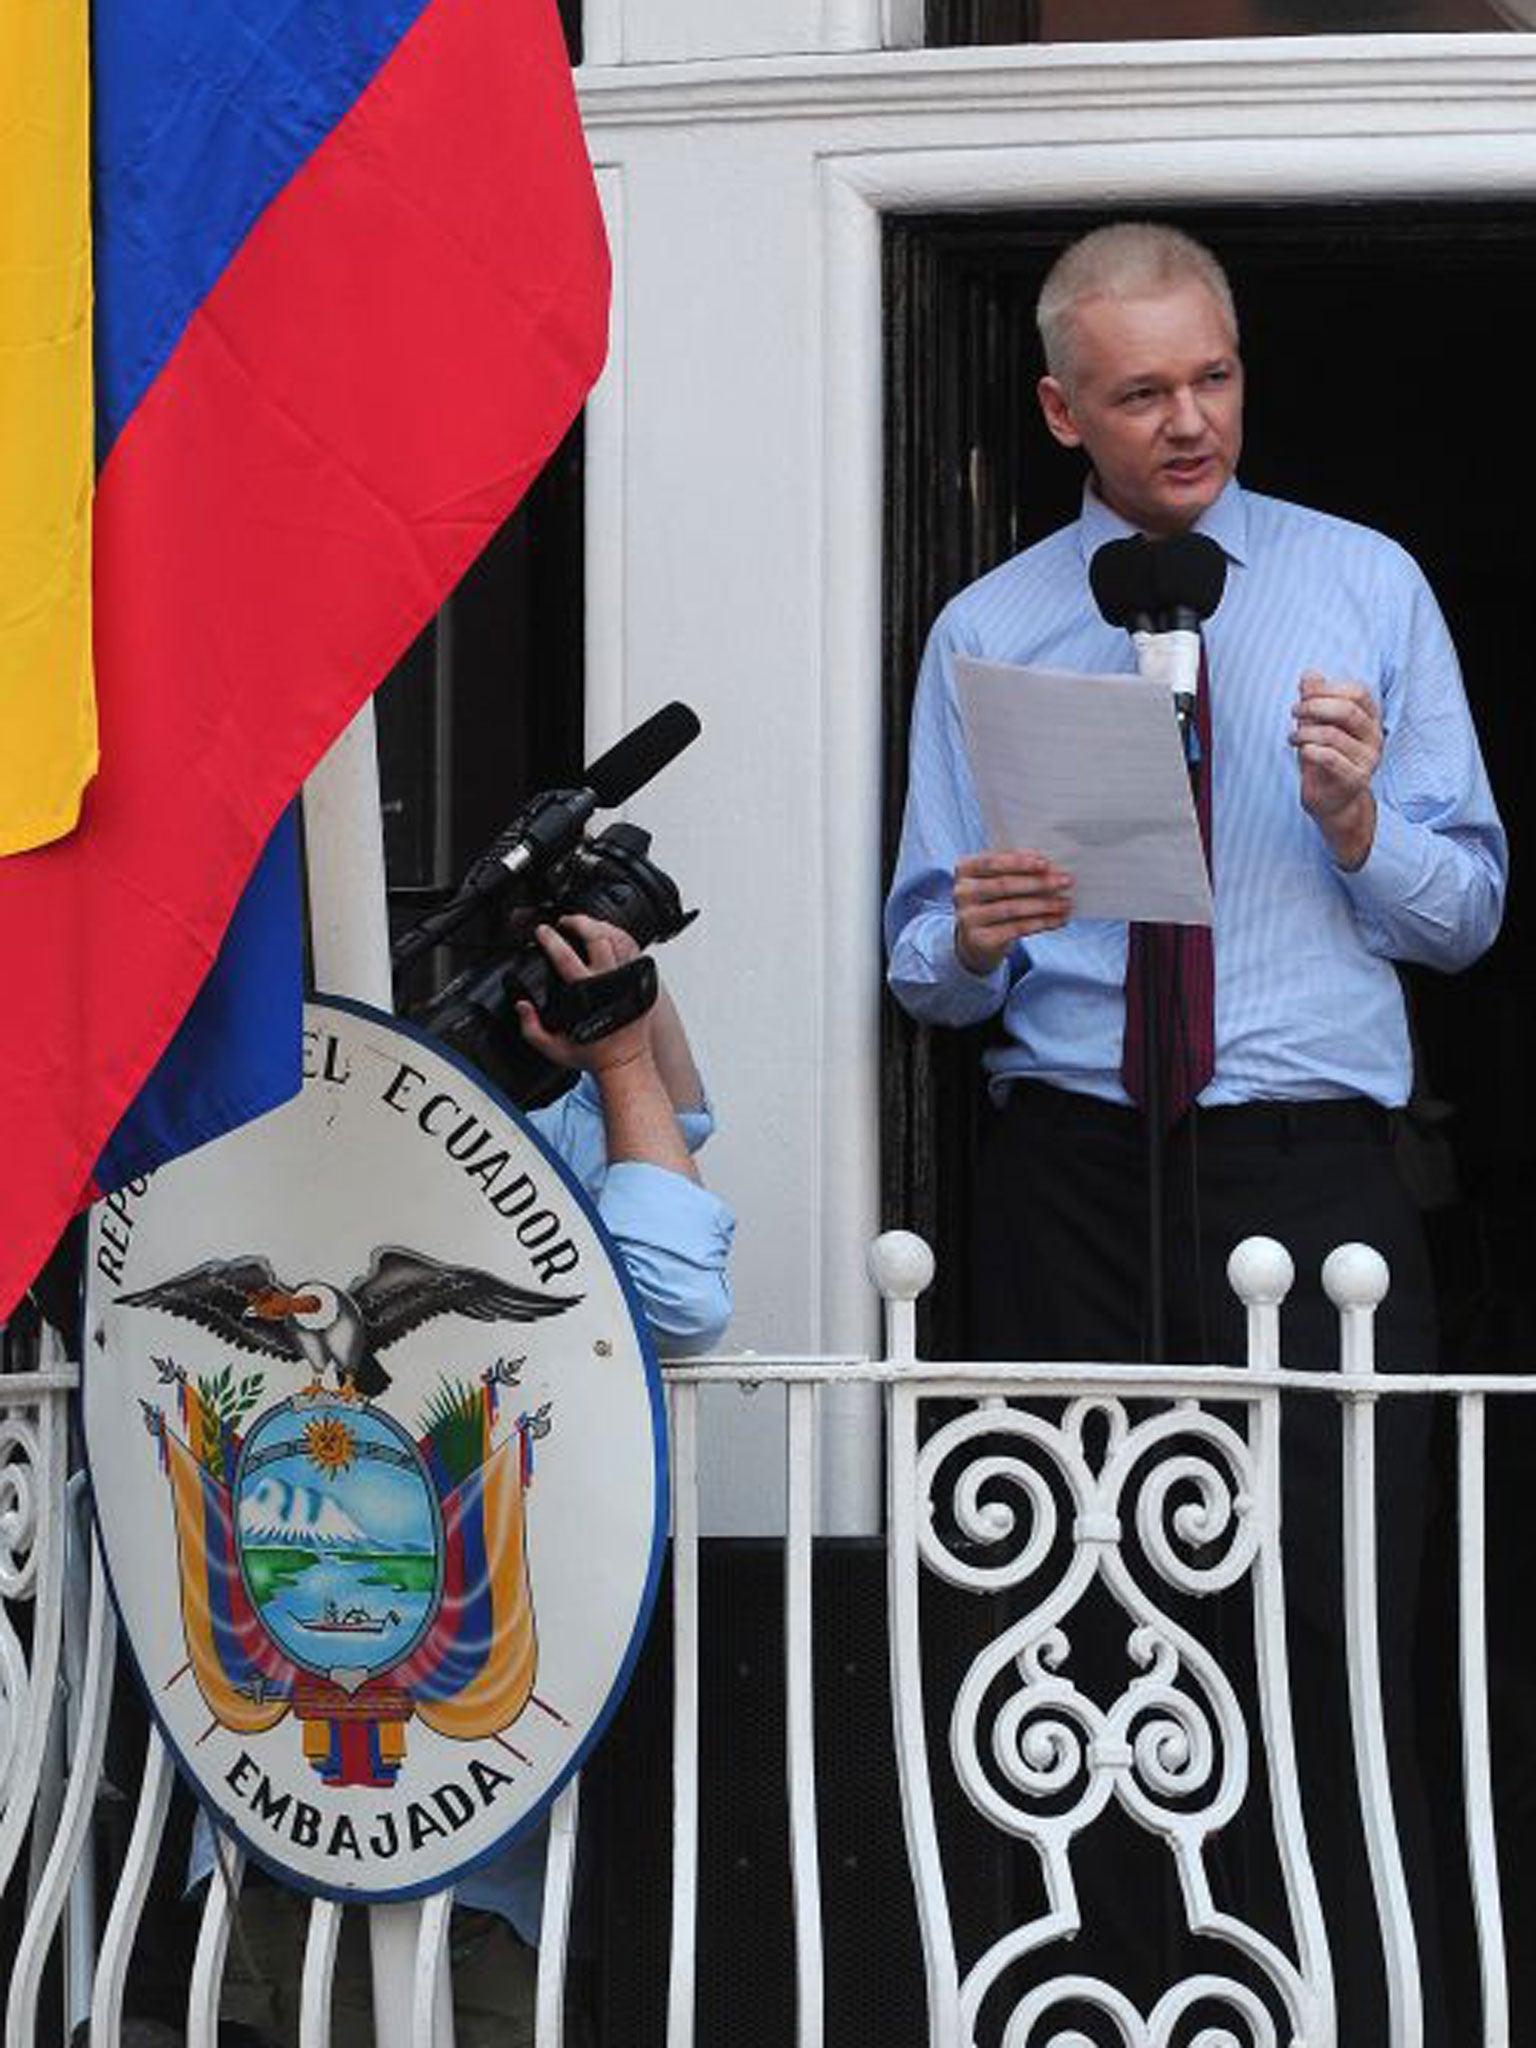 Julian Assange has been holed up in London’s Ecuadorian embassy for a year